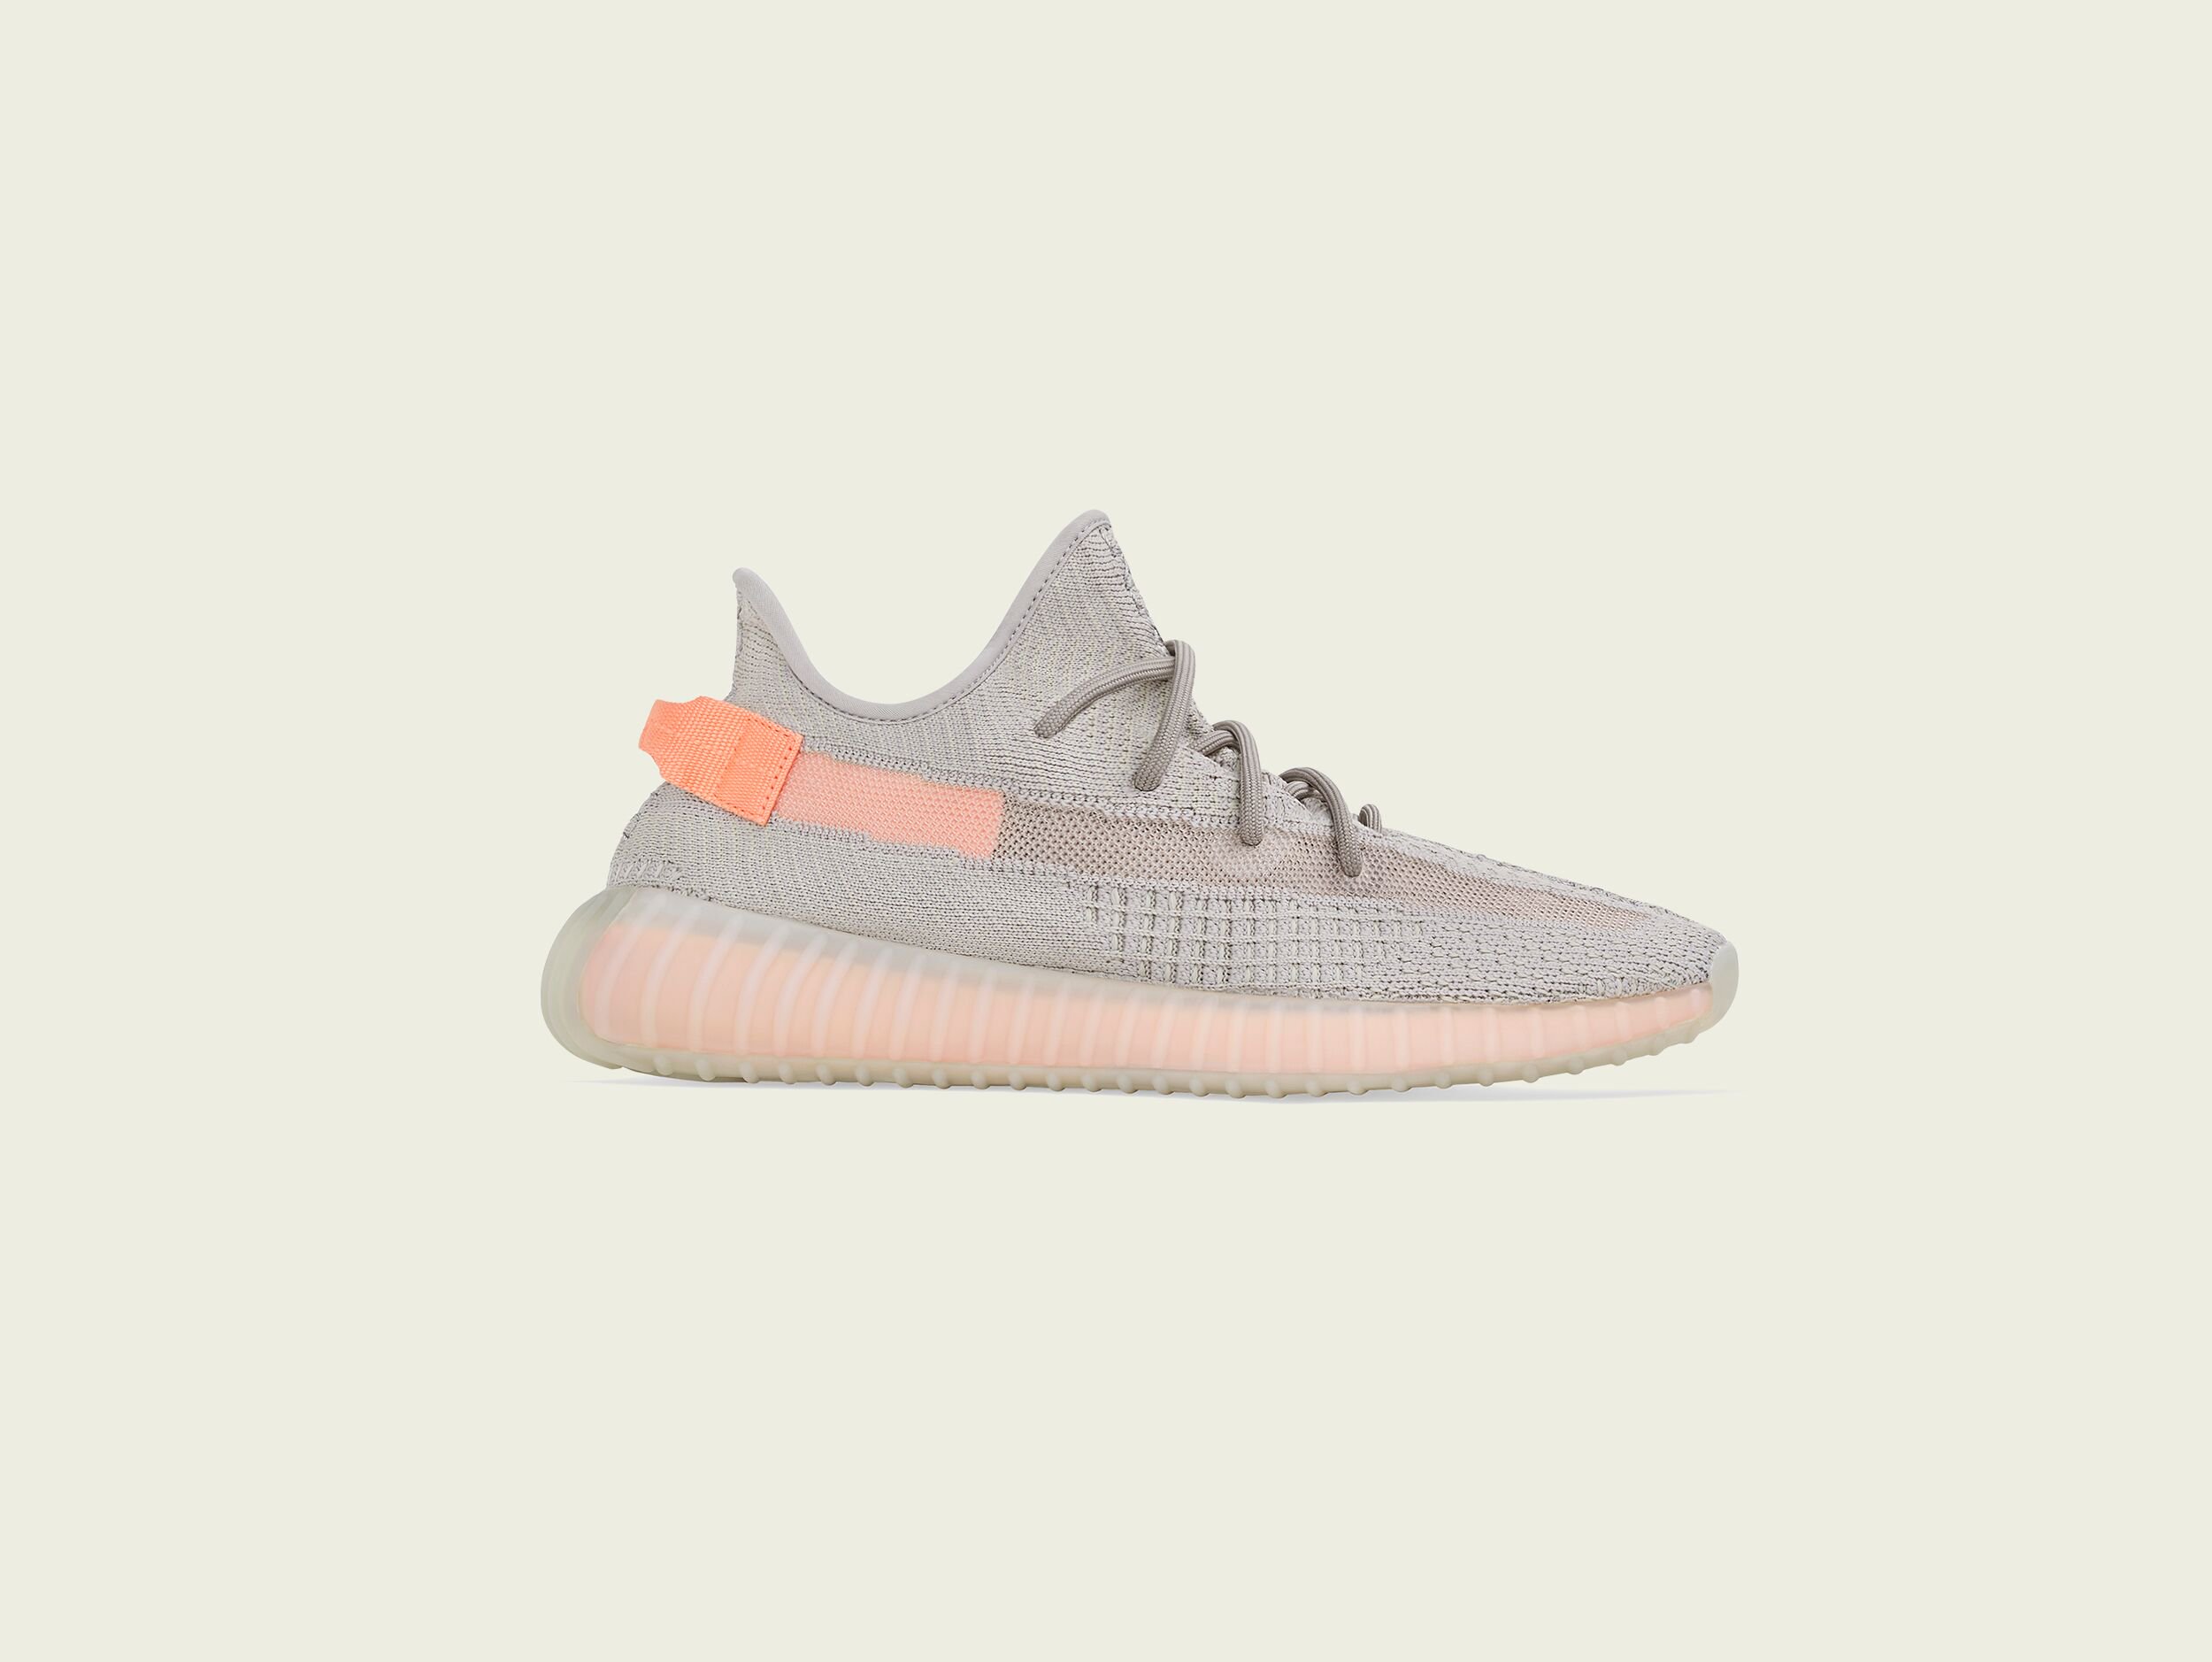 Escritura conferencia pala SNS en Twitter: "[EUROPE ONLY] --- THE YEEZY BOOST 350 V2 'TRFRM' ONLINE  &amp; IN-STORE RAFFLE IS NOW LIVE! Access here: https://t.co/mCJBkuOYDQ  (The raffle page is only visible in Europe) Registration ends